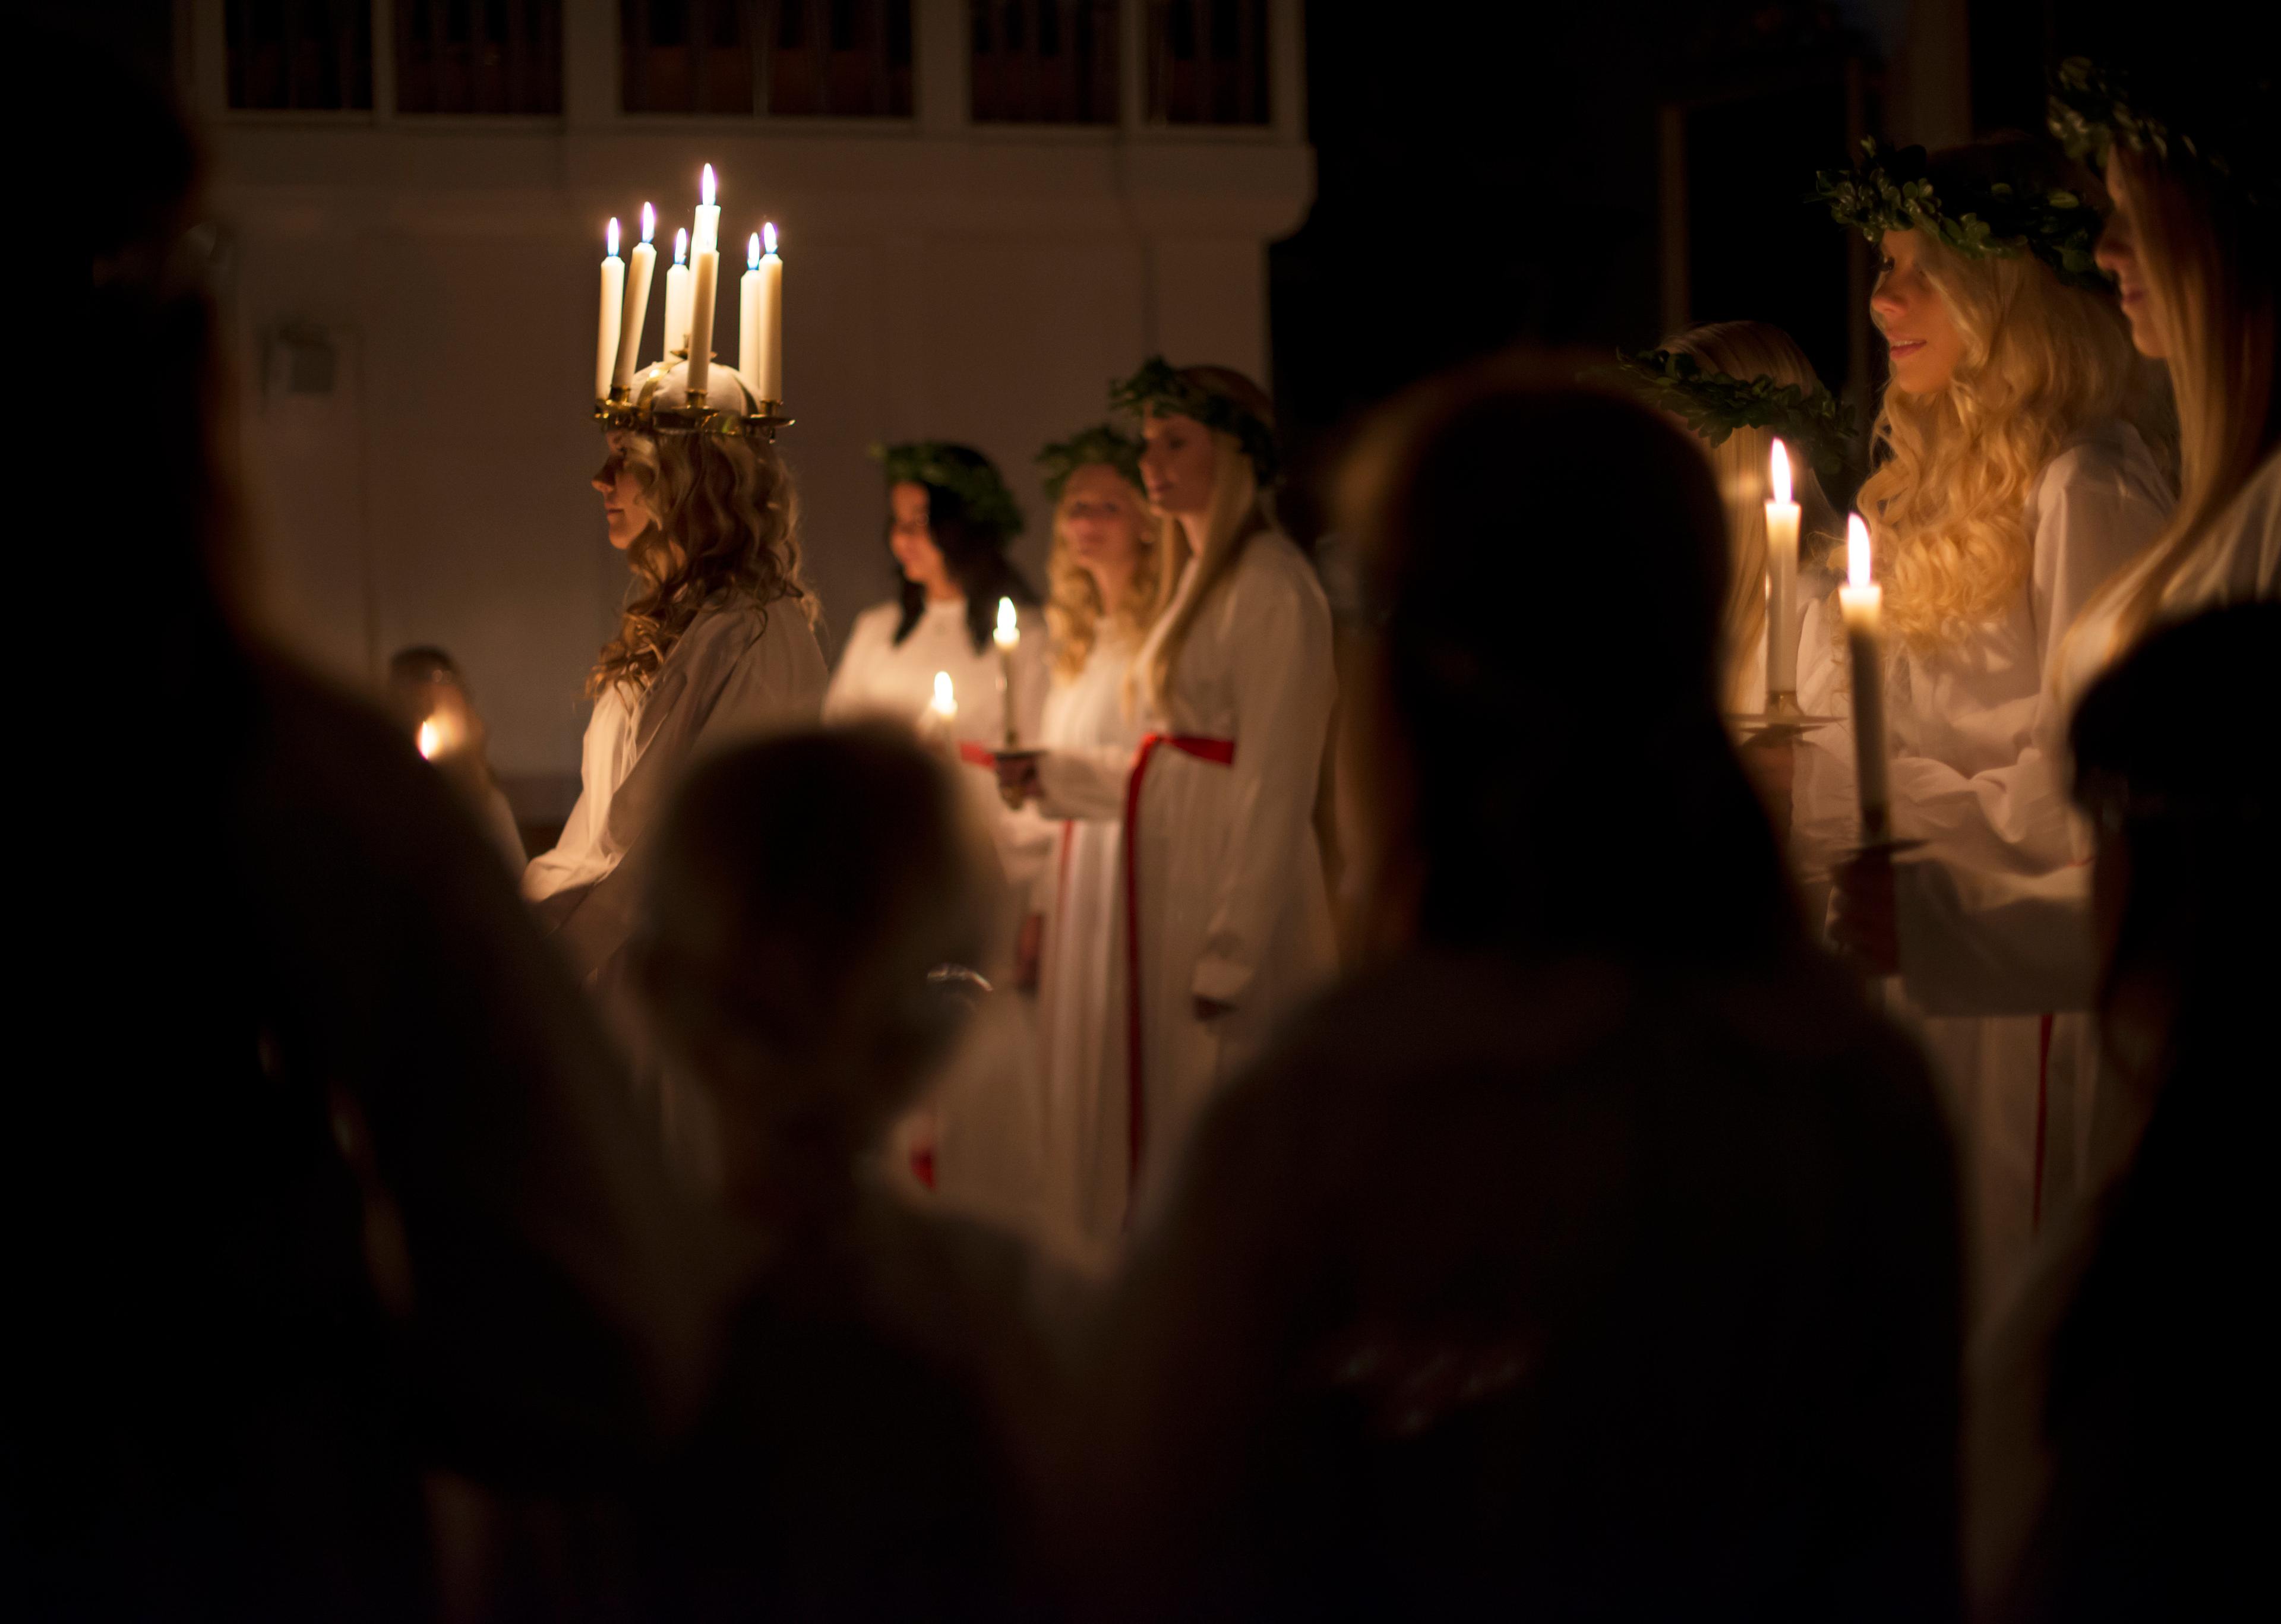 Lucia, with a crown of lit candles on her head, stands in front of the handmaidens who are each holding a lit candle in their hands.